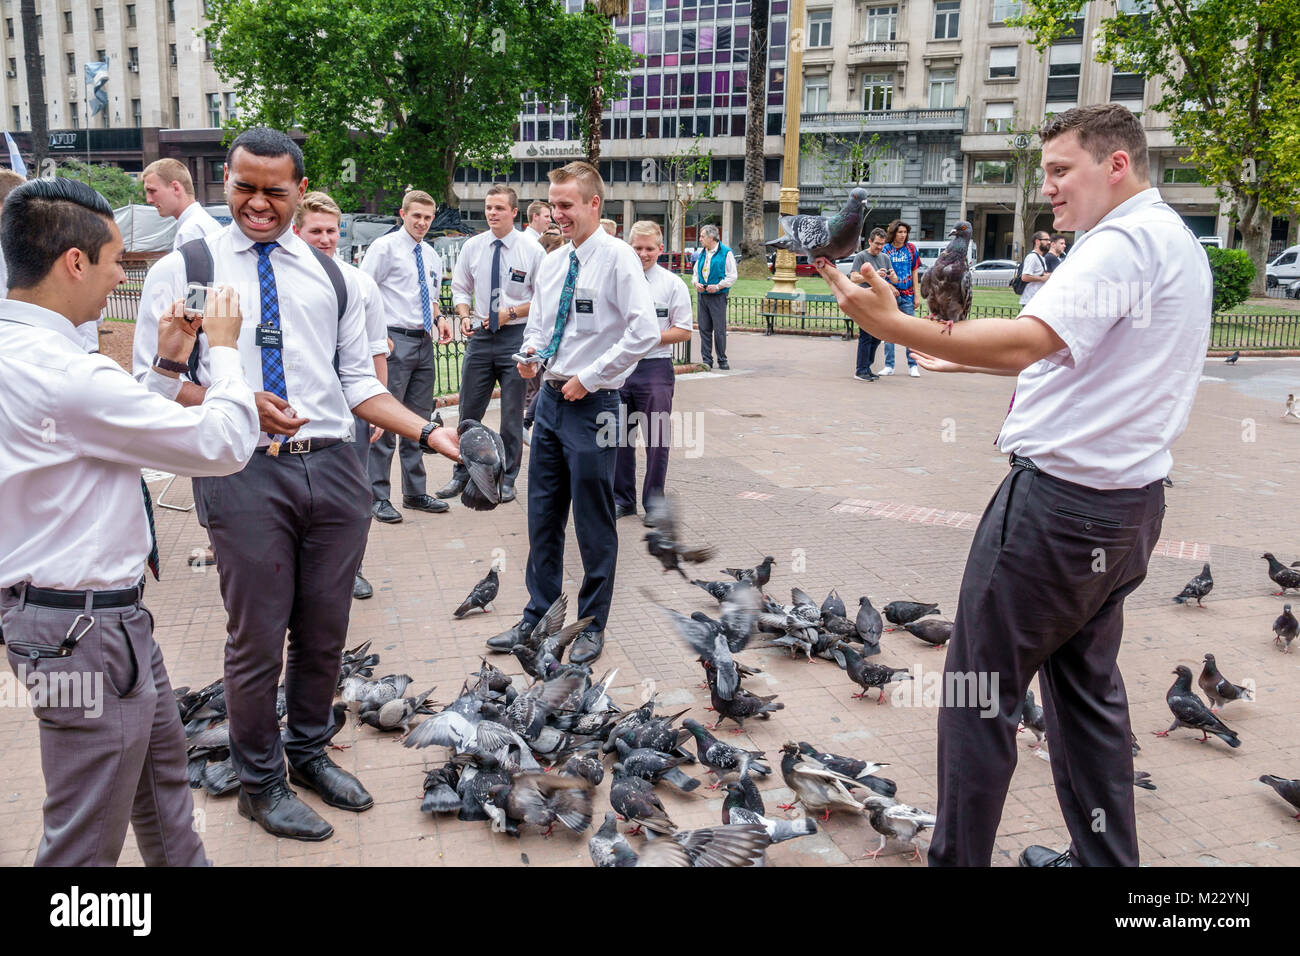 Buenos Aires Argentina,Plaza de Mayo central square,park,Mormon,man men male,young adult,missionary,conservative attire,feeding,holding pigeons,Hispan Stock Photo